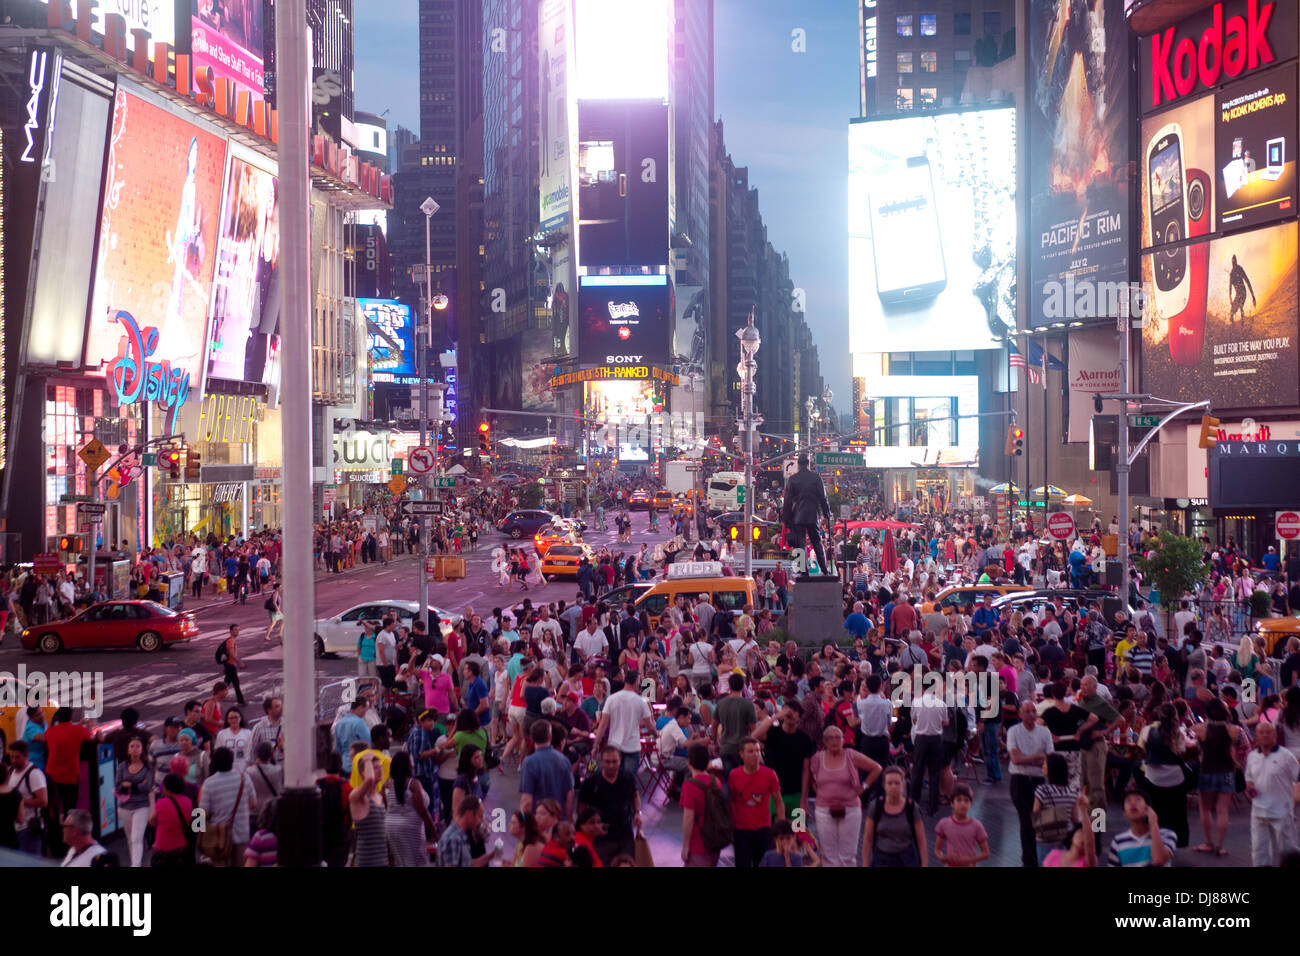 A crowd of people gather under the neon signage in Times Square, New York City at night. Stock Photo